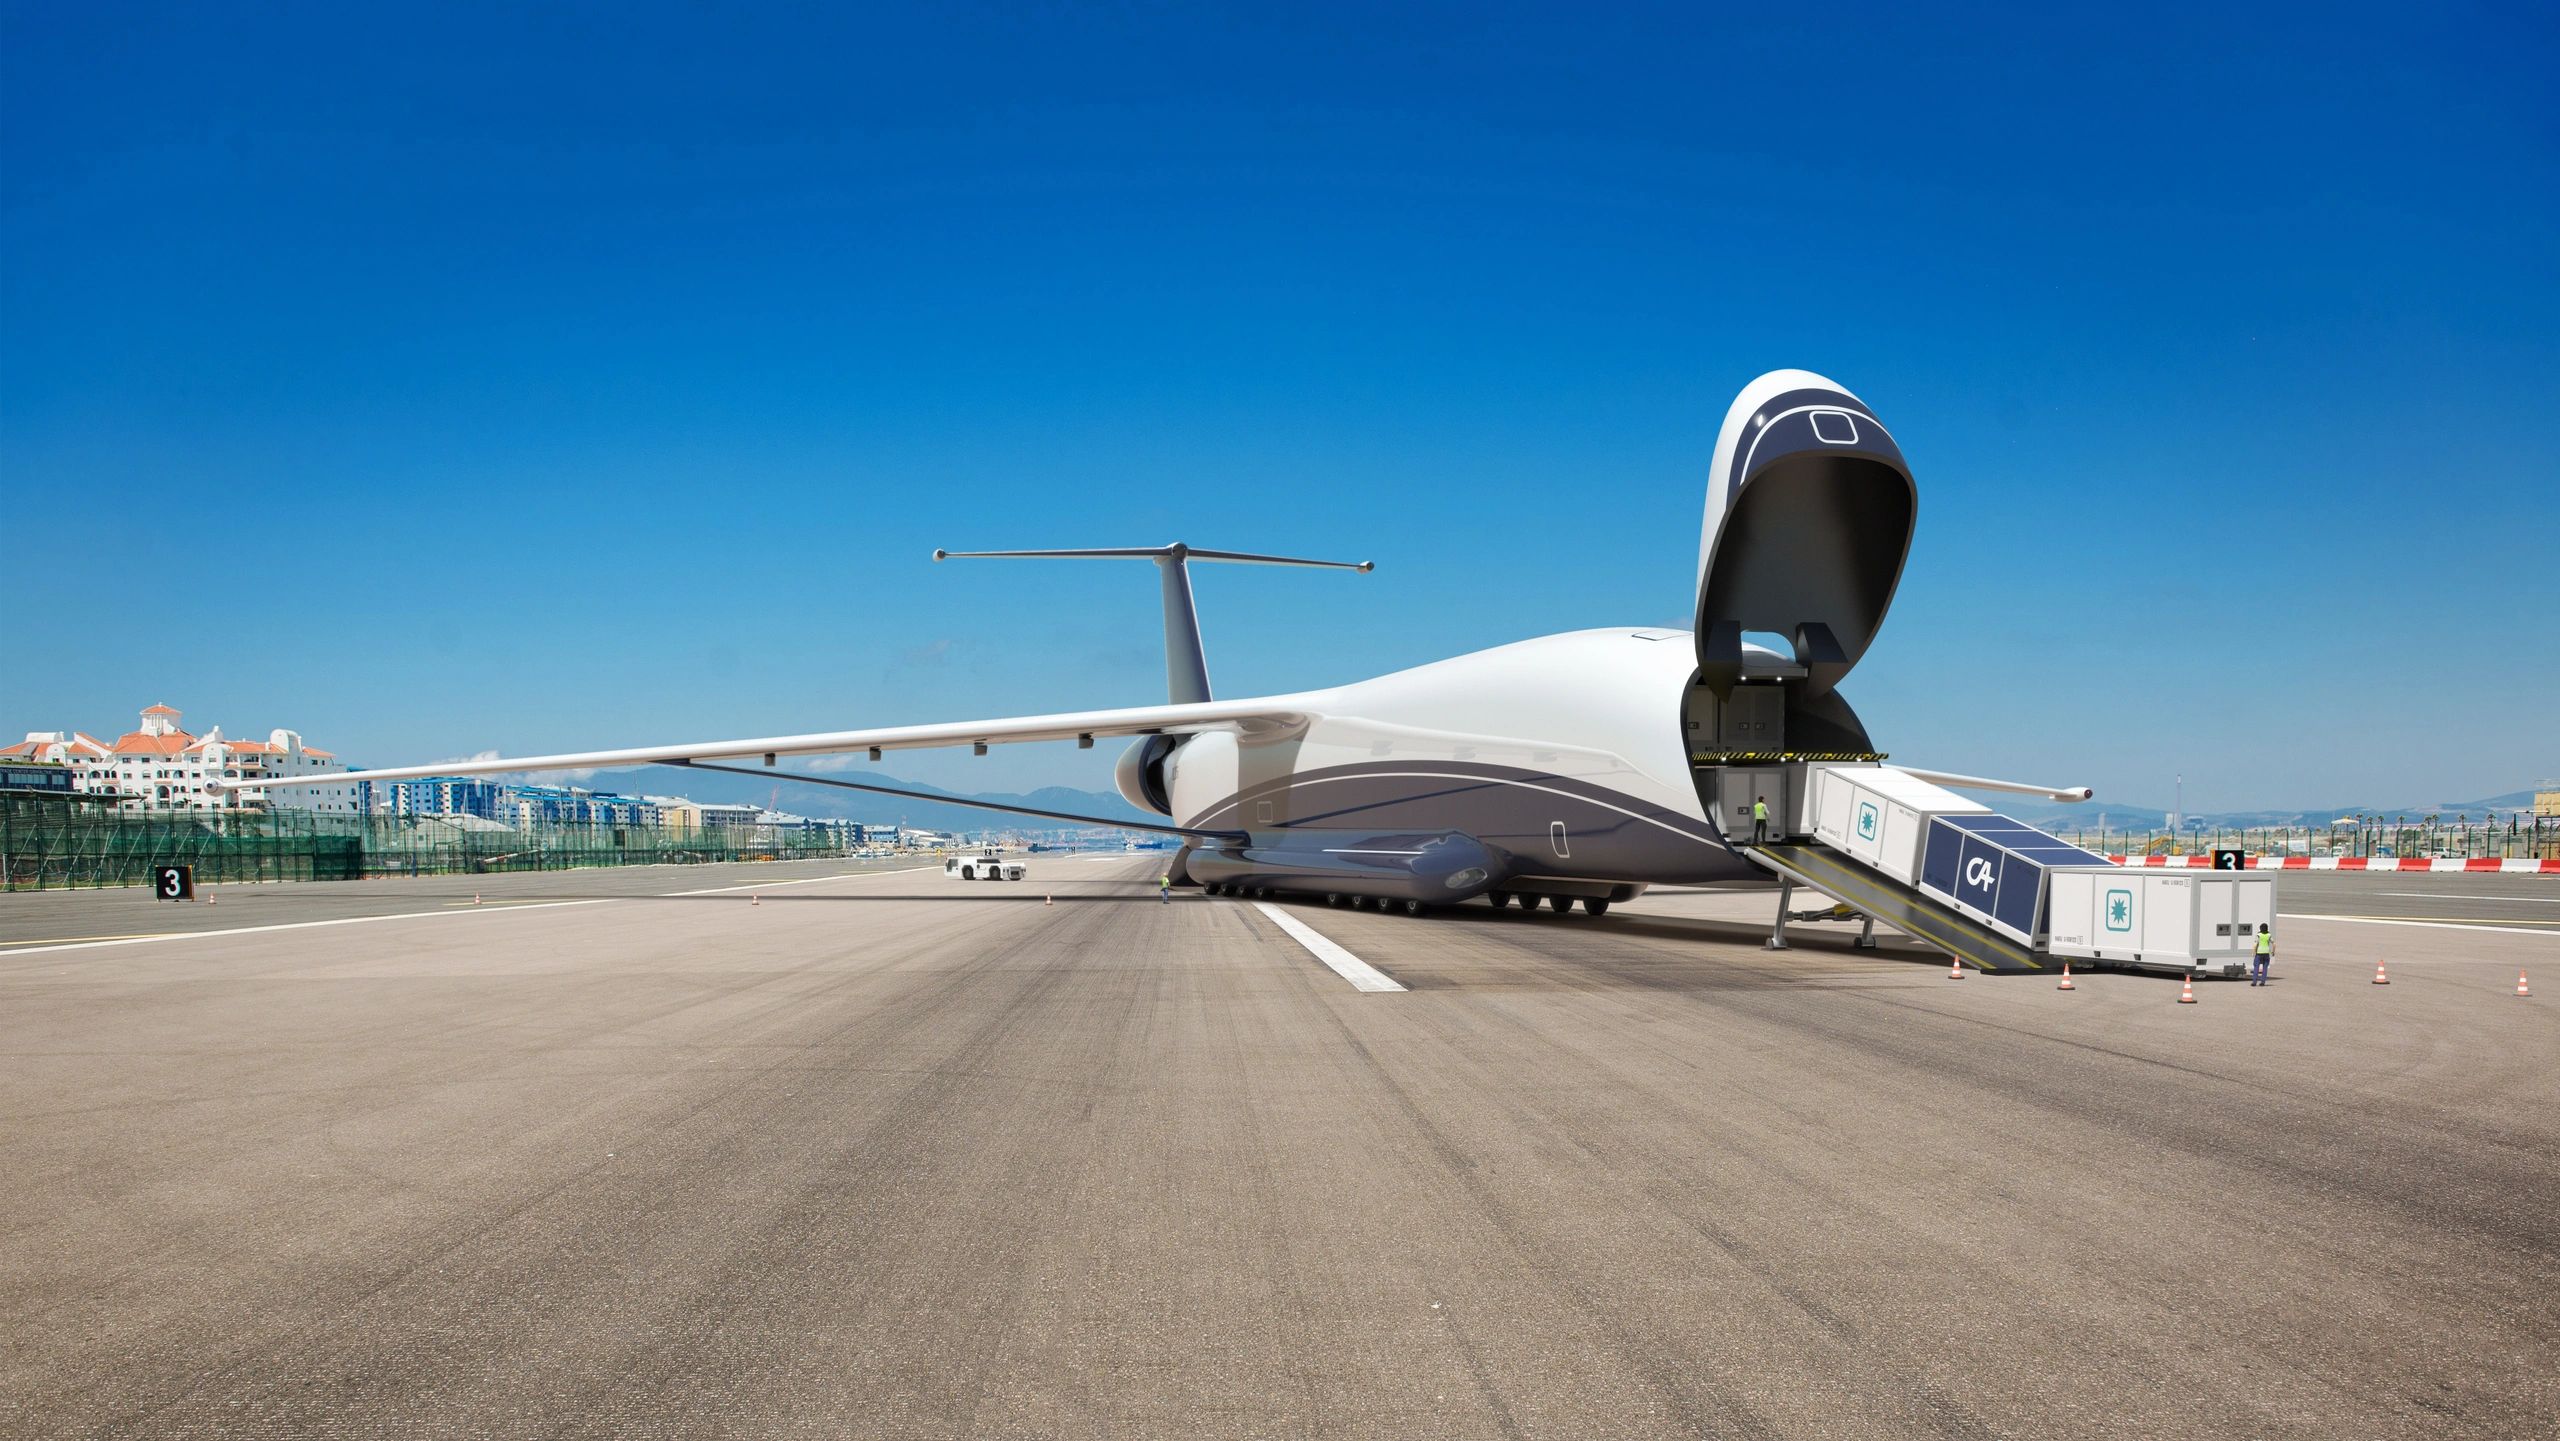 Air Freight Solutions with Autonomous Cargo Drone Aircraft